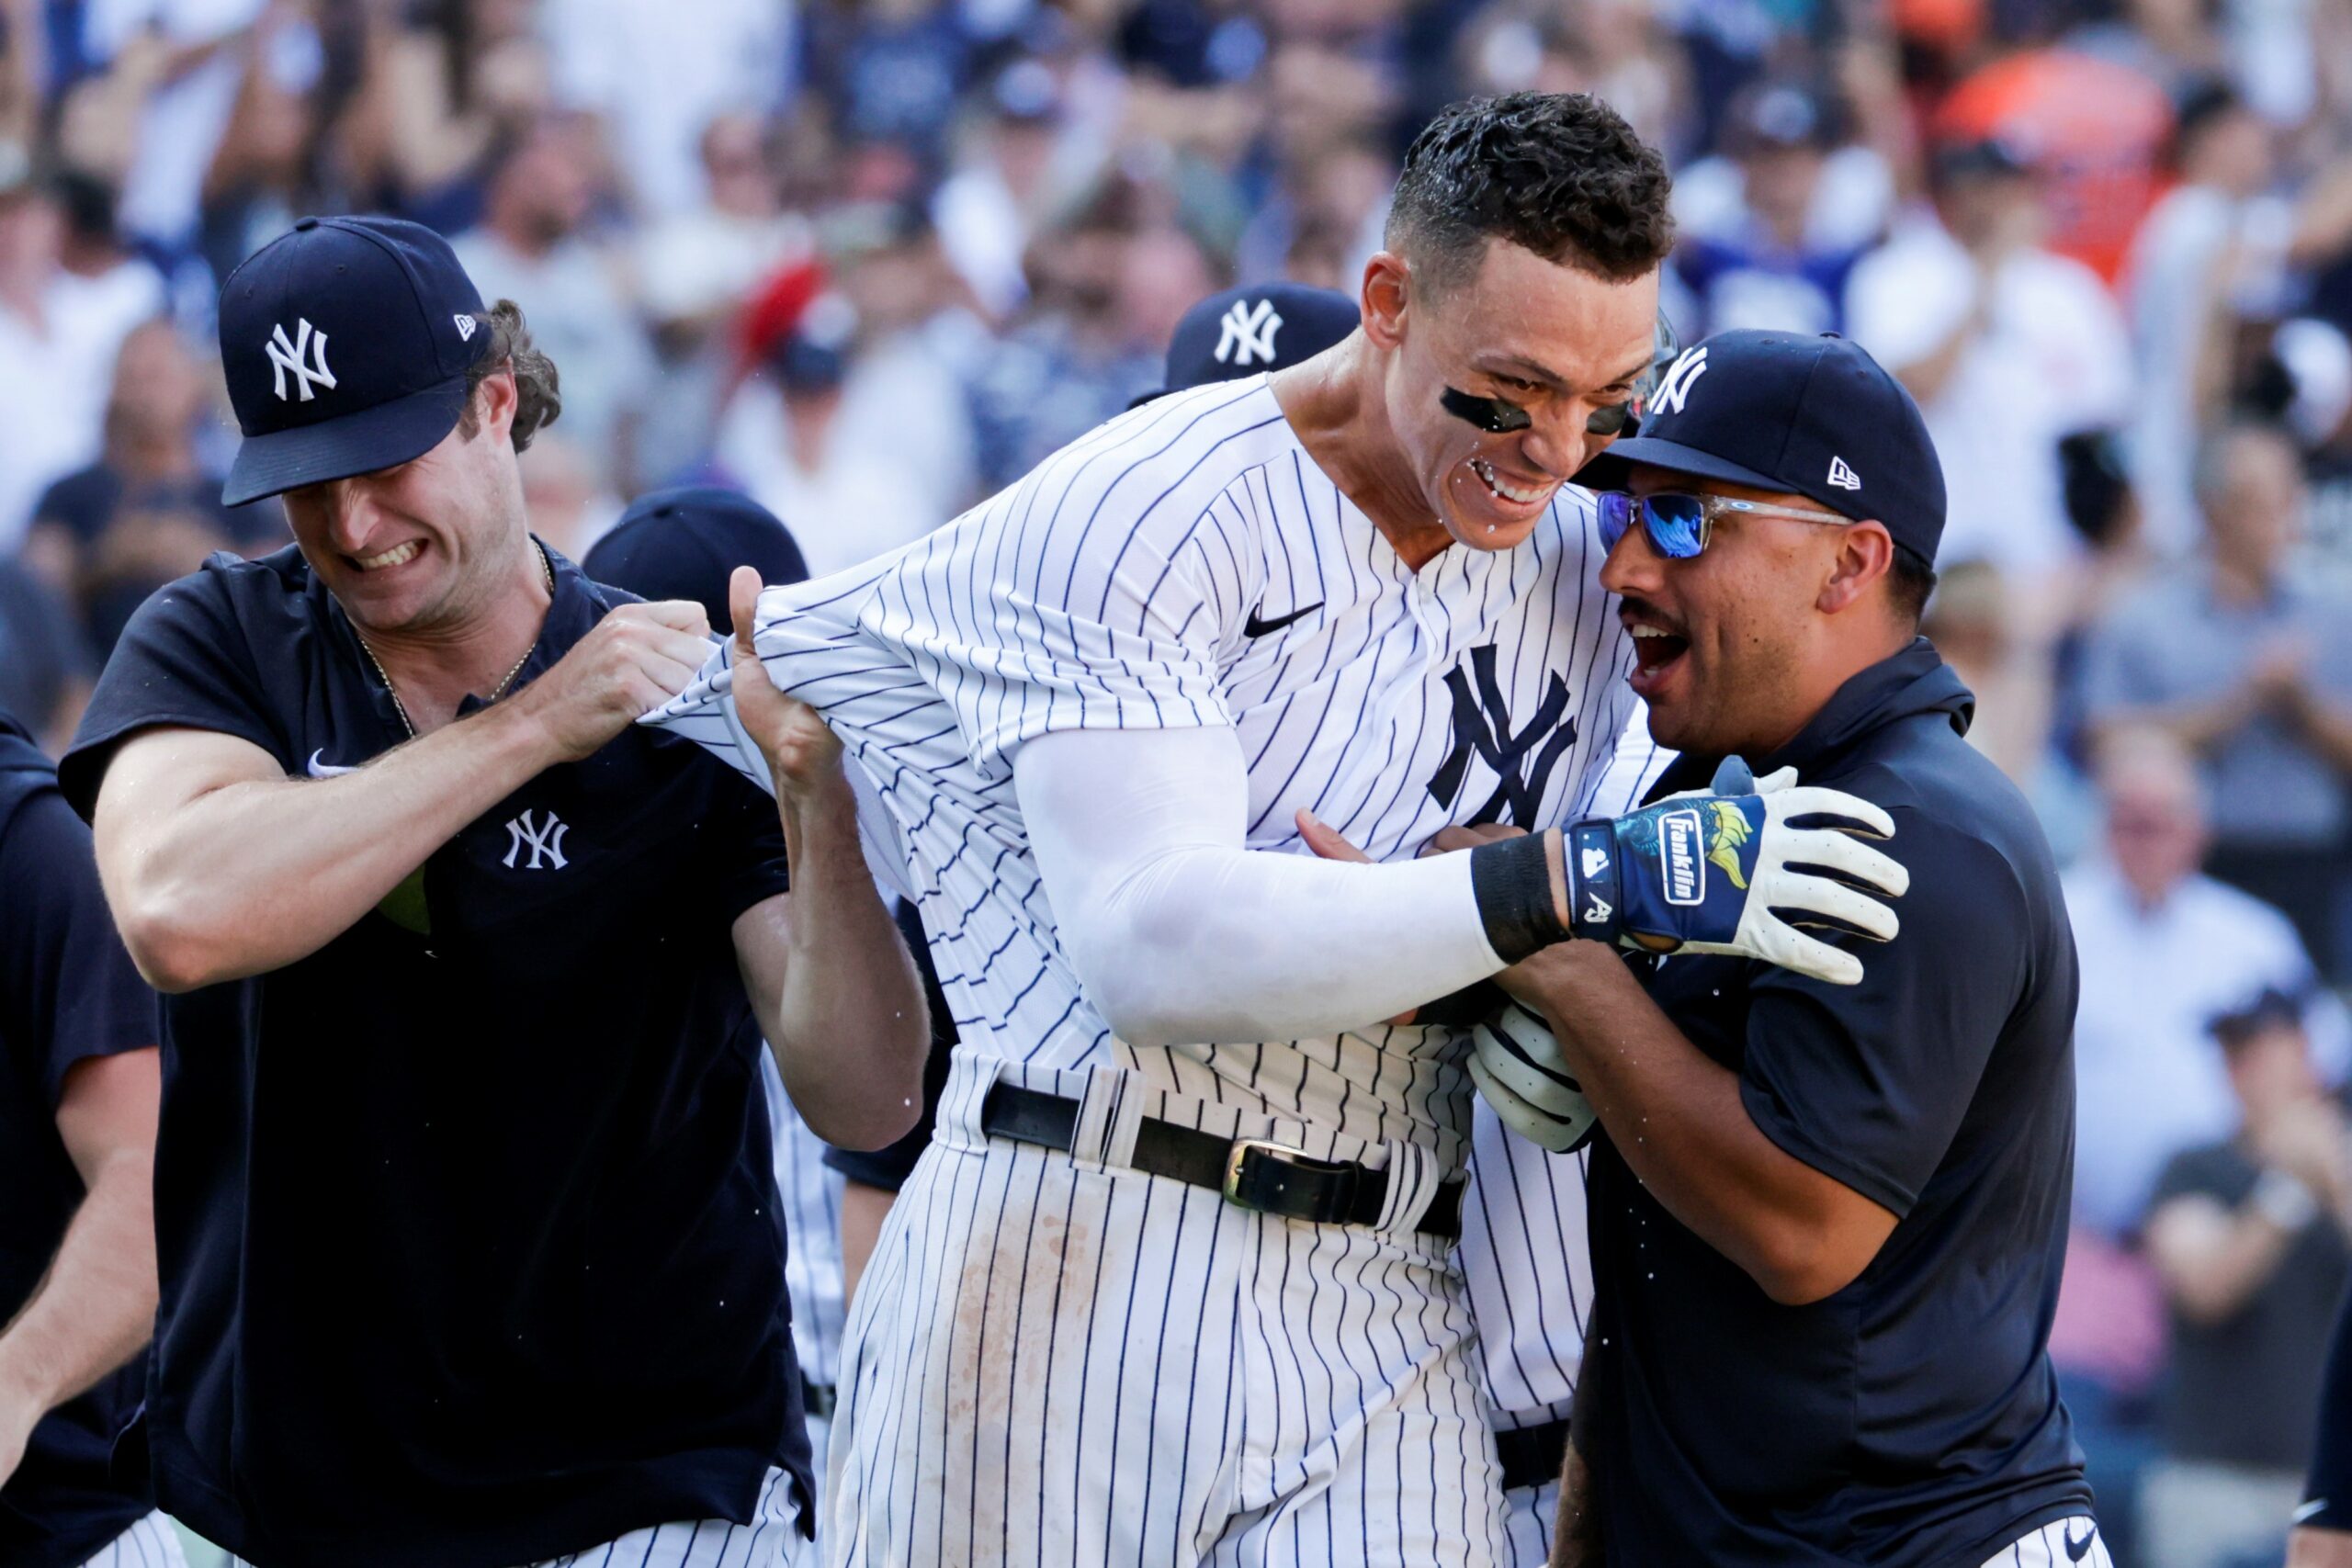 The season of the Yankees in Aaron Judge’s dream is getting better